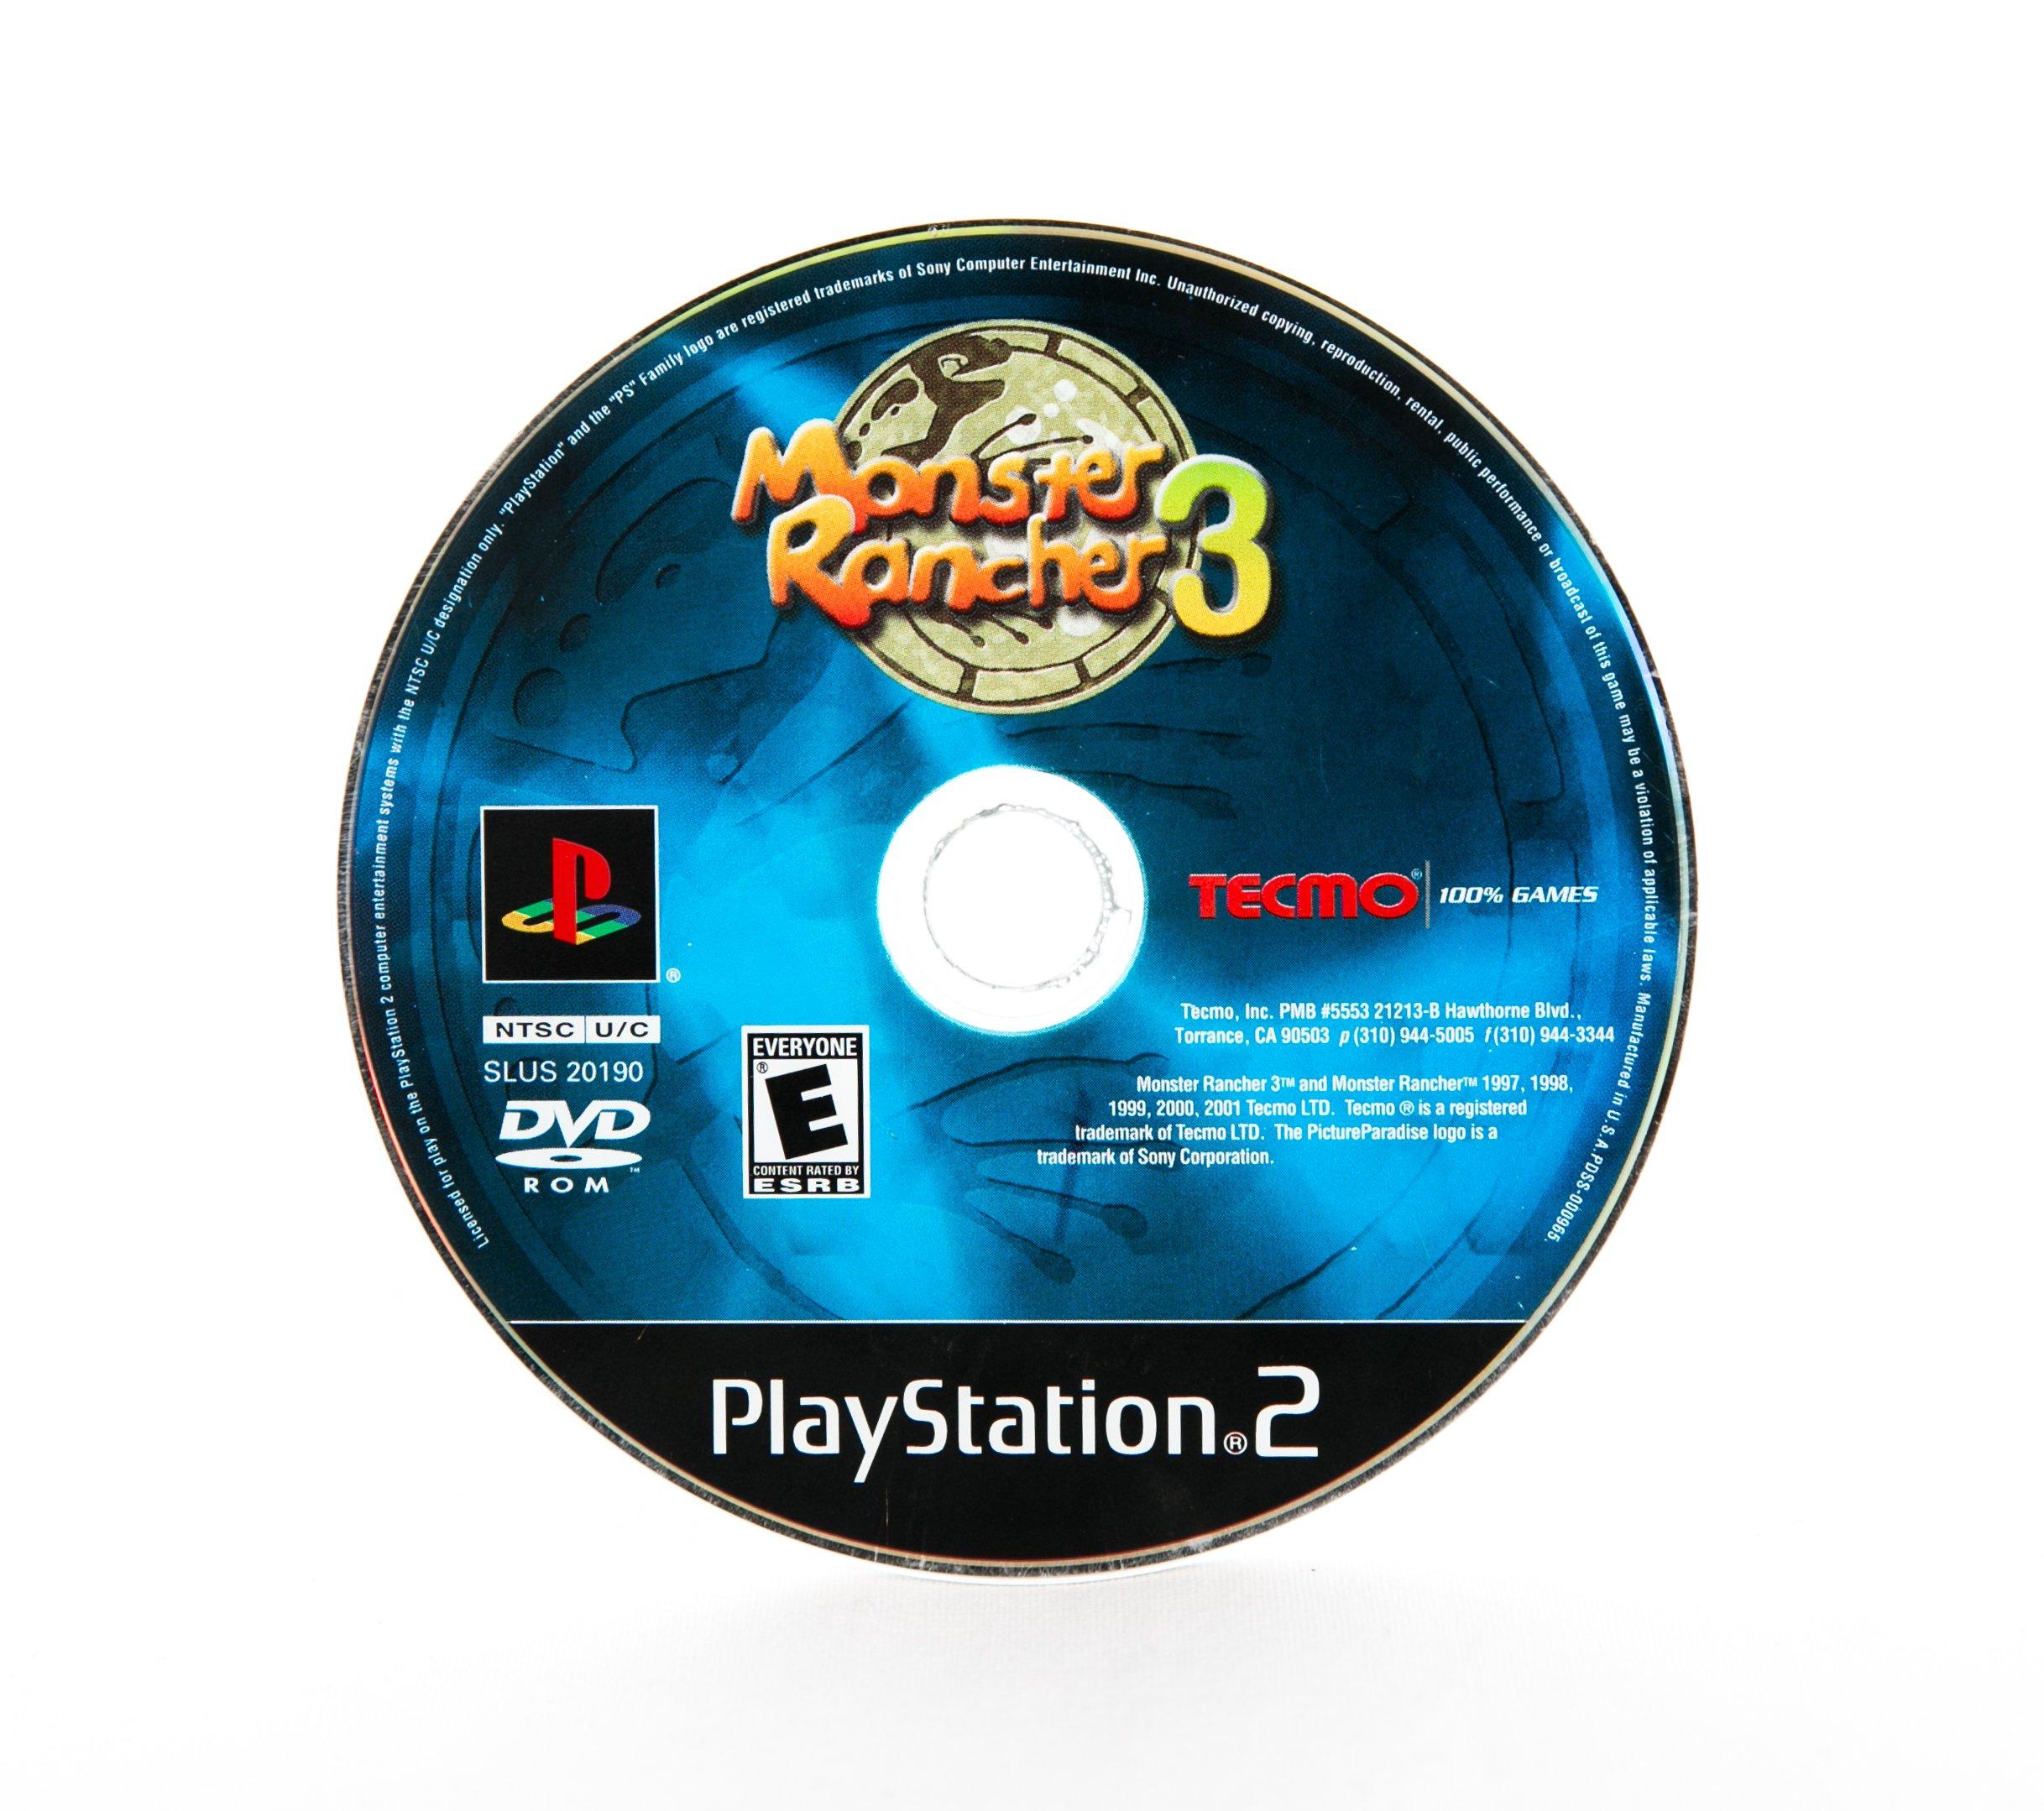 My favorite PlayStation 2 game was DVDs